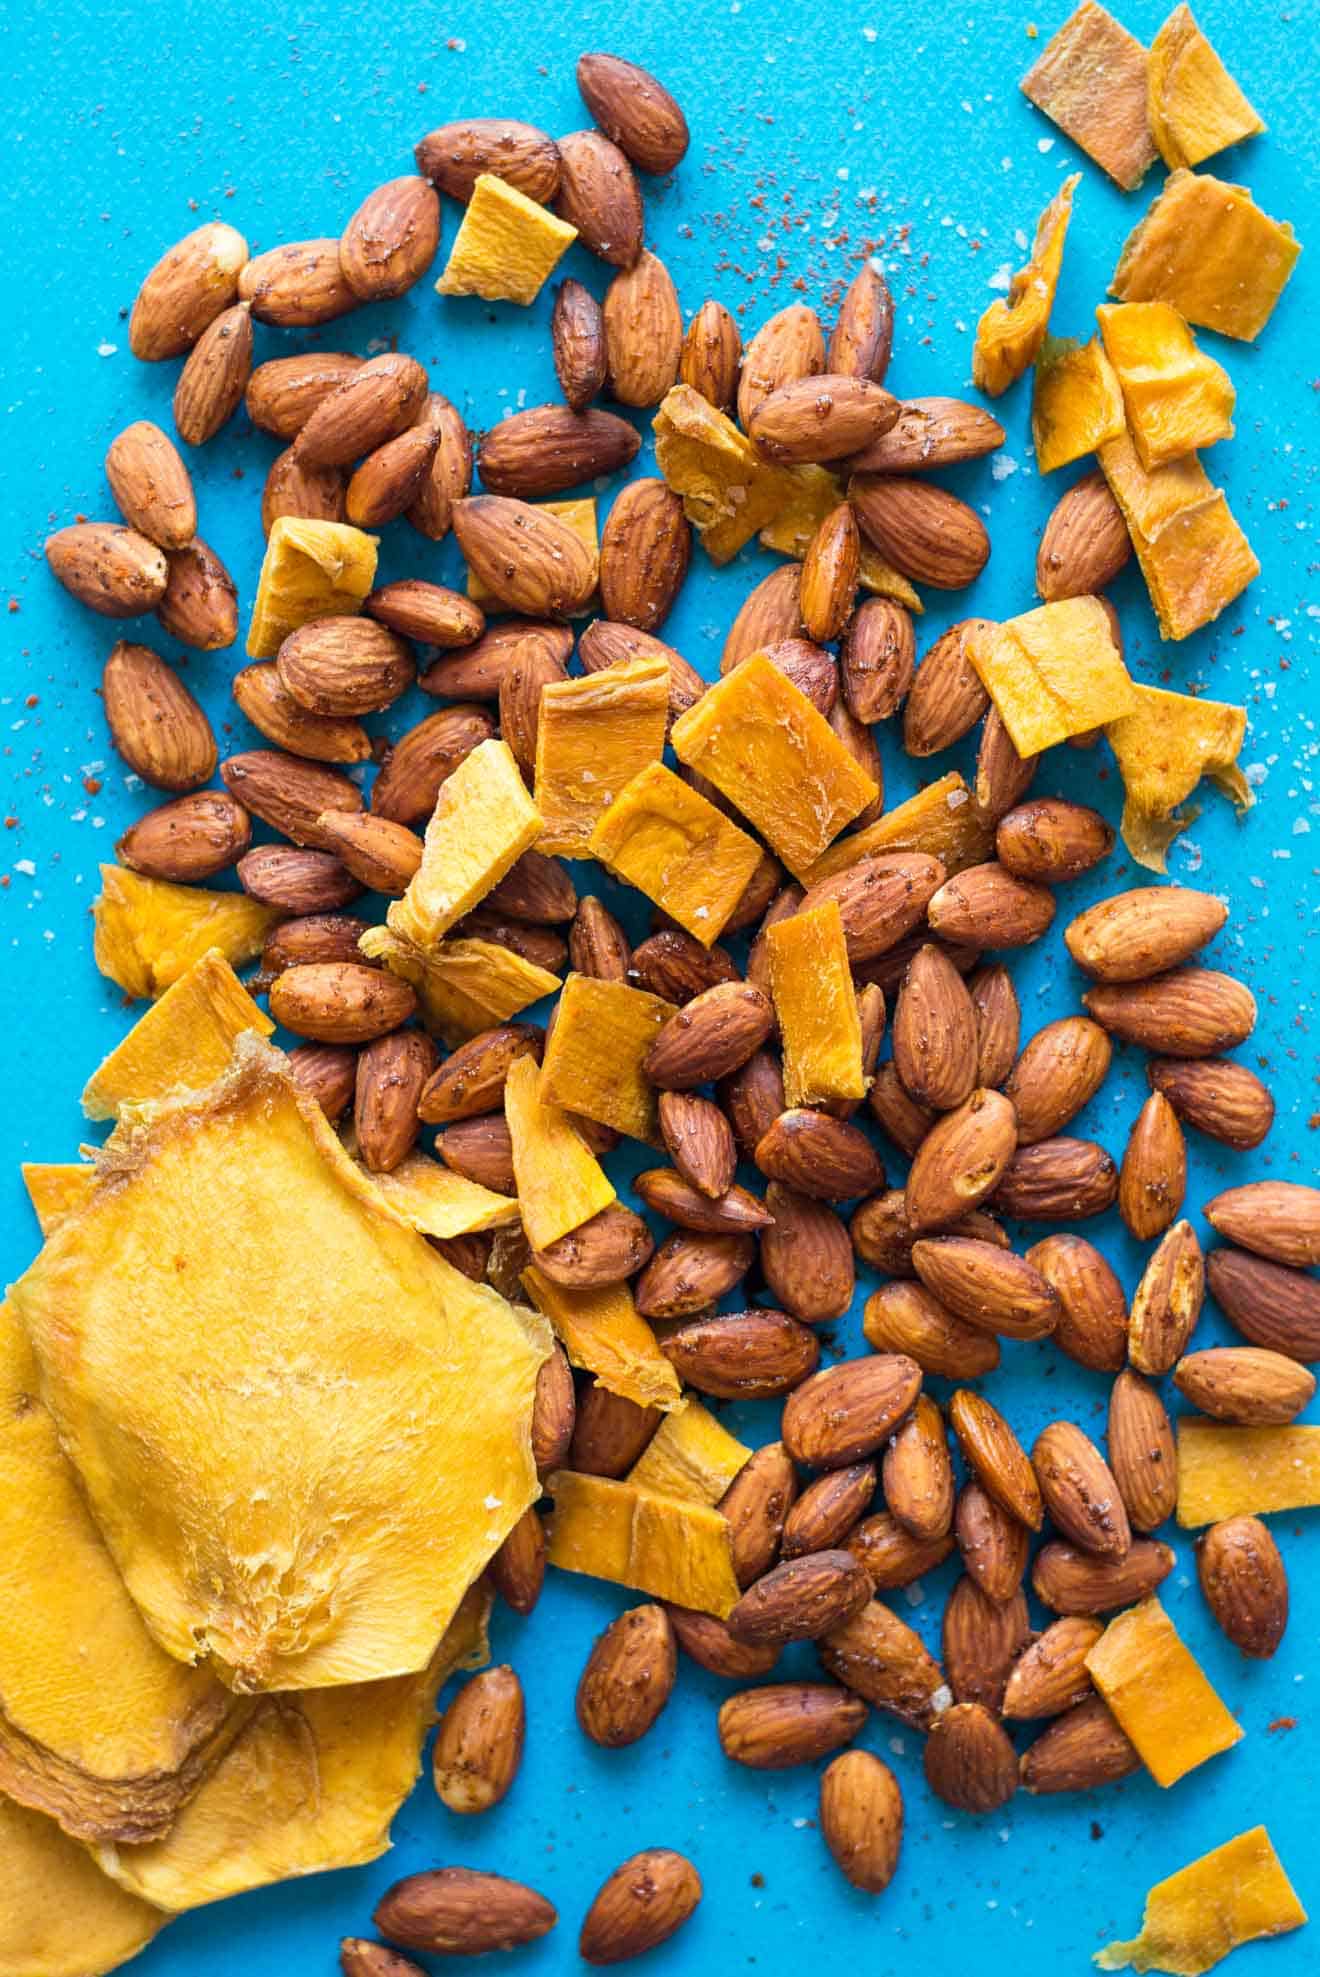 Mango Chili Almond Trail Mix + 4 Easy Trail Mix Recipes with Almonds - here's 4 healthy snacks that you can make at home! They're gluten free and take only 30 minutes to prepare! by @healthynibs